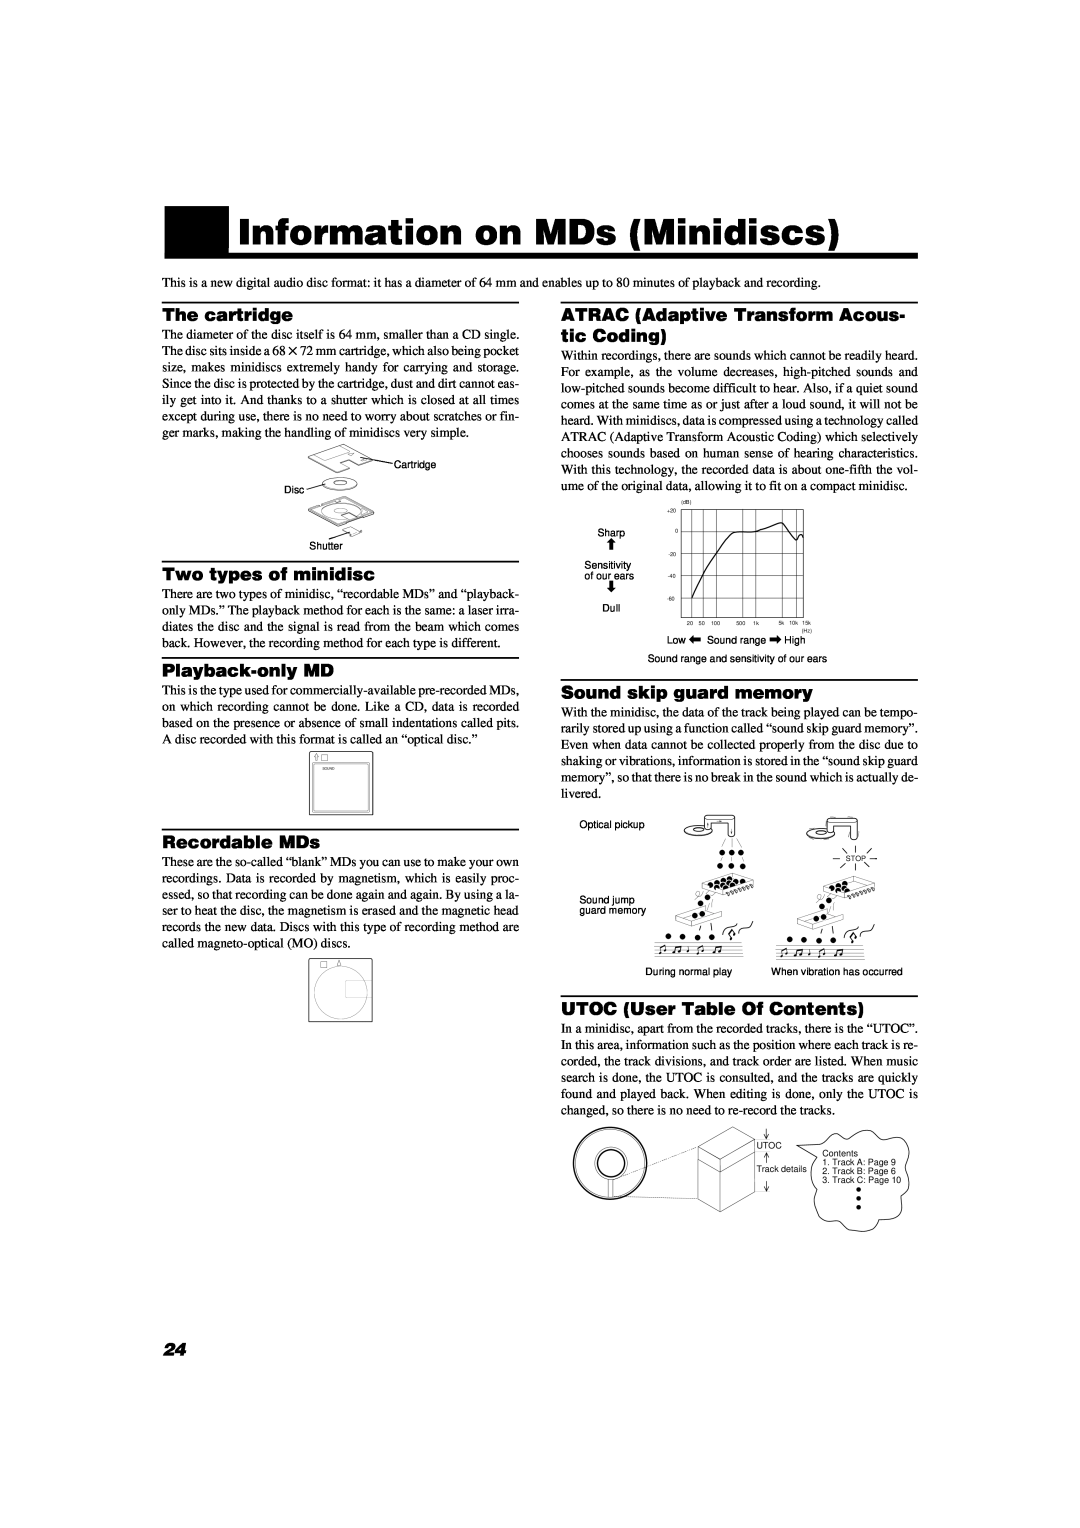 JVC UX-V9MD manual Information on MDs Minidiscs, The cartridge, Two types of minidisc, Playback-only MD, Recordable MDs 